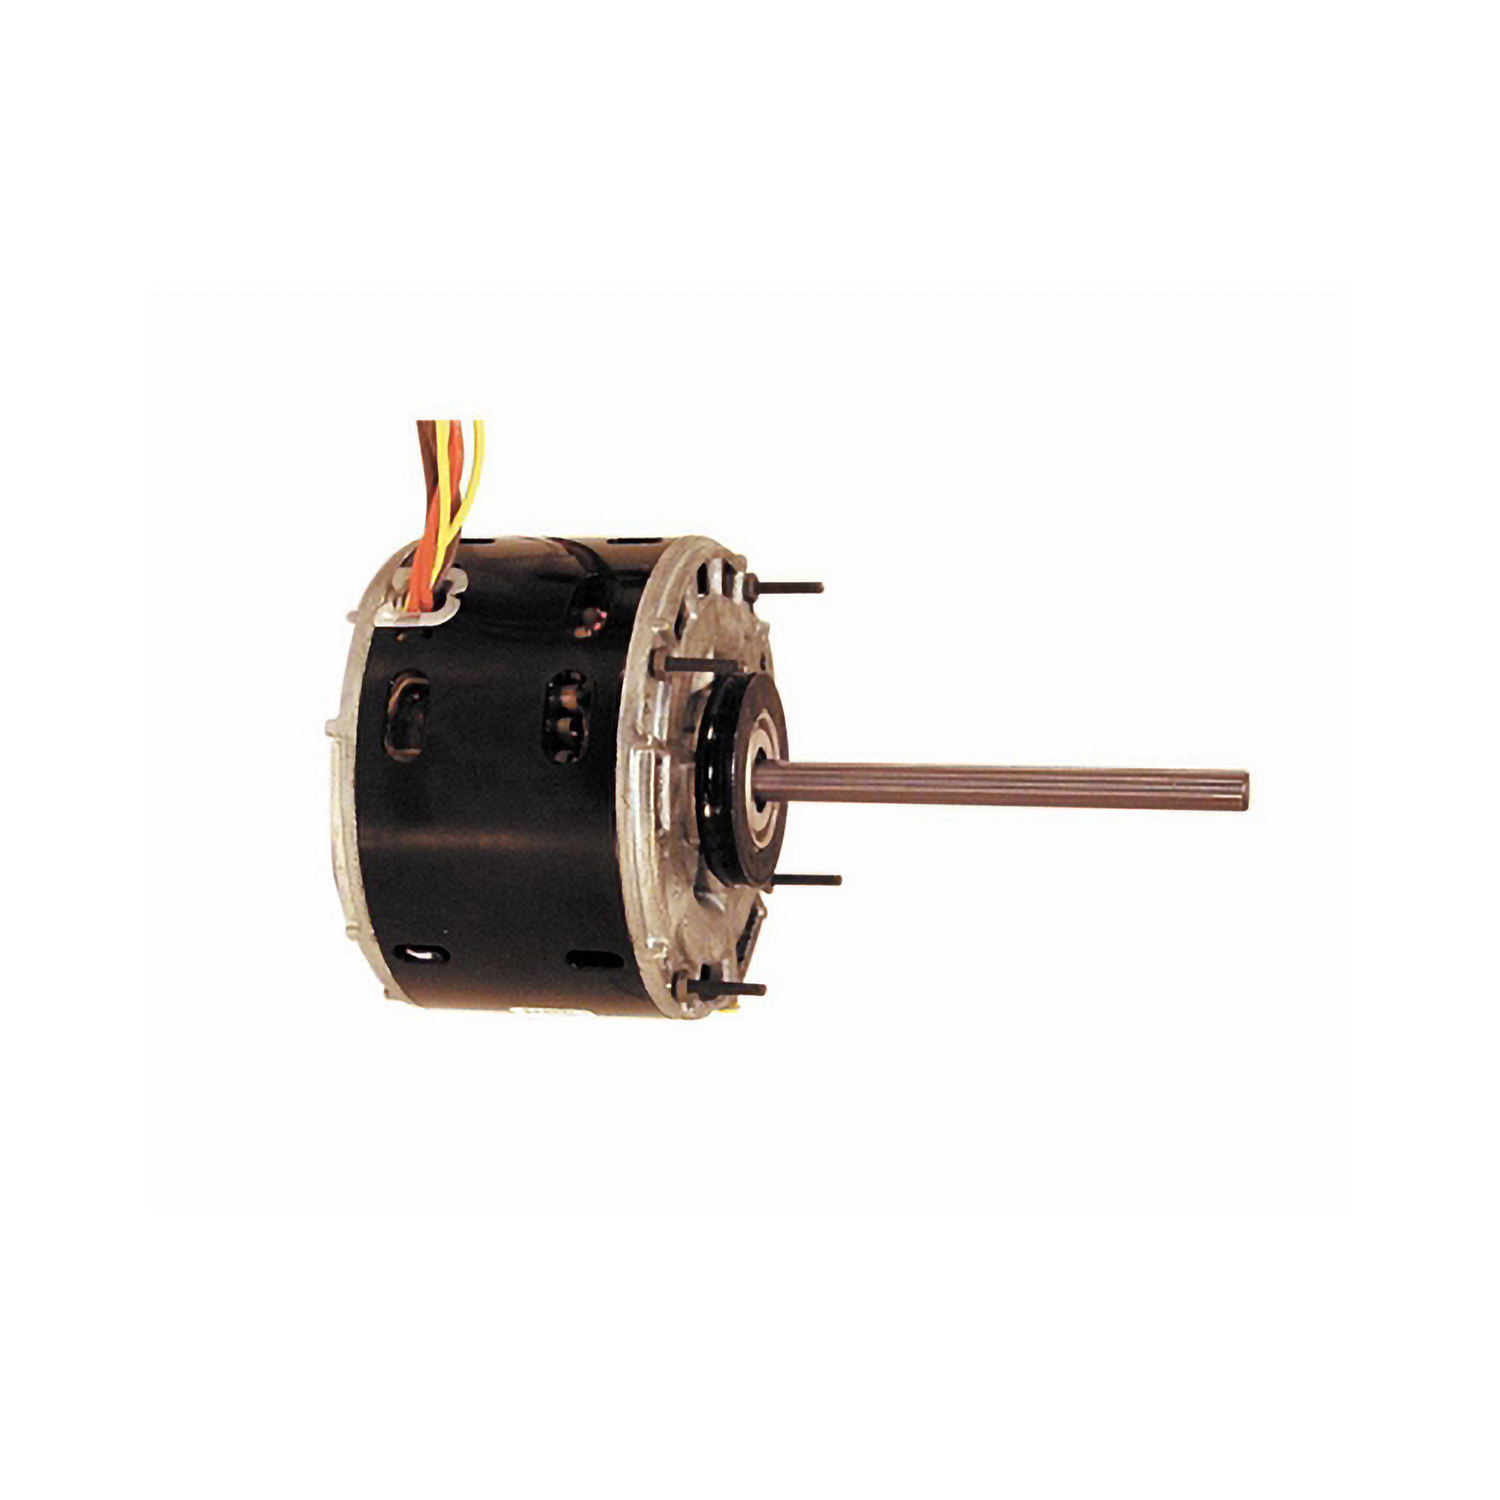 5-5/8 In Dia High Efficiency Indoor Blower Motor 115 Volts 1075 RPM 1/3 HP